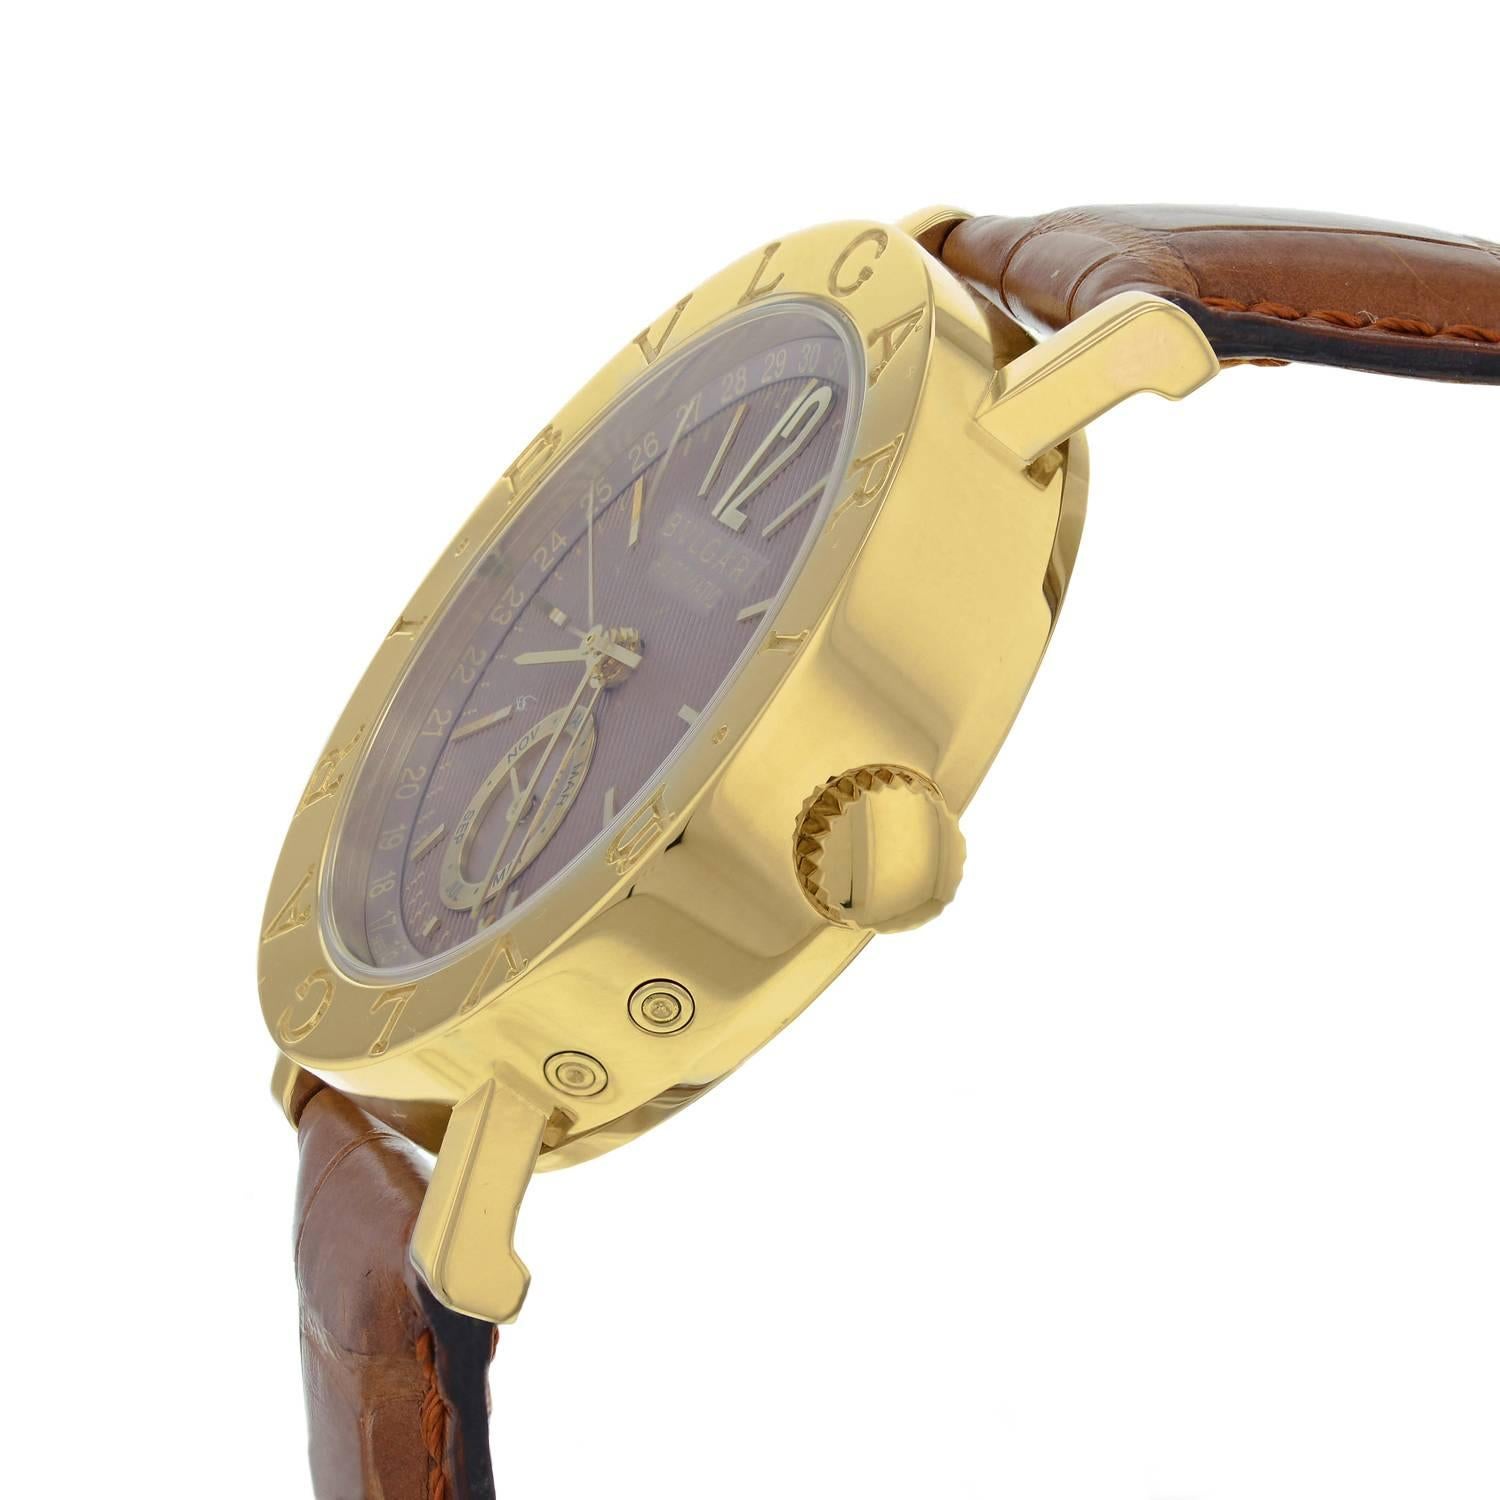 This brand new Bvlgari Diagono BB 38 GL AC is a beautiful men's timepiece that is powered by an automatic movement which is cased in a yellow gold case. It has a round shape face, gold case dial and has hand arabic numerals style markers. It is